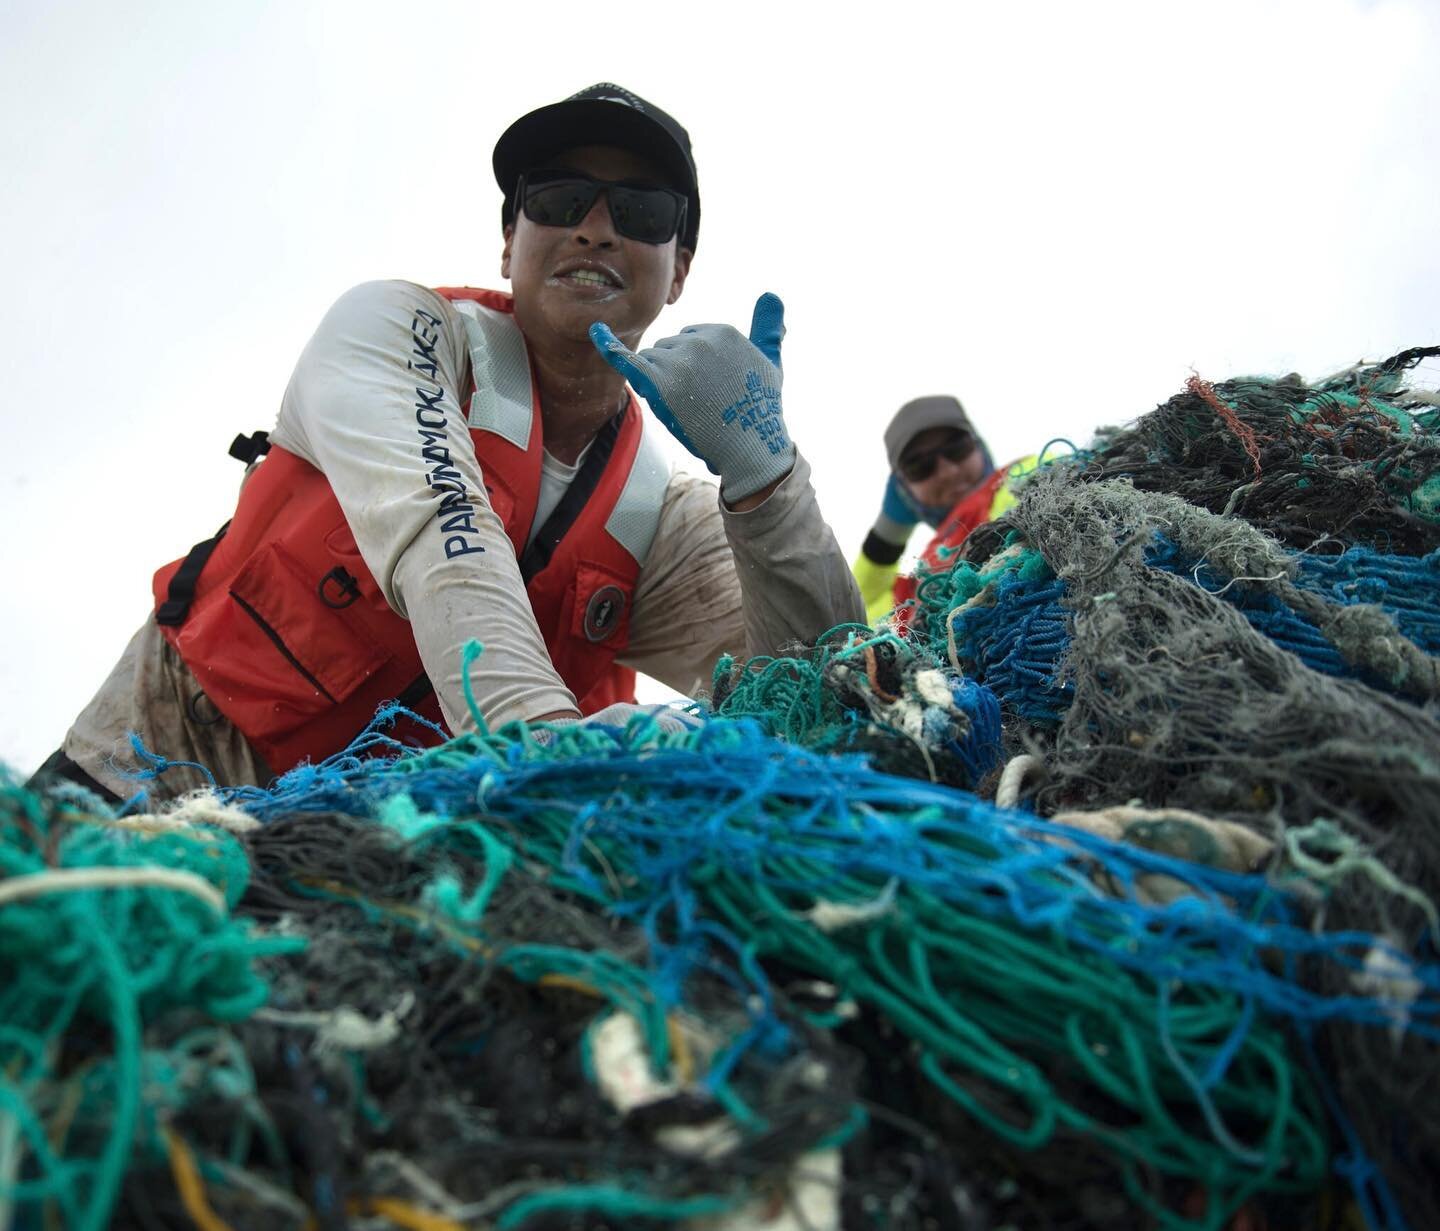 The PMDP crew has wrapped up their time on Kapou with the removal of another 7,890 lbs of marine debris! Their second and third day of field work was welcomed by harsh winds and turbulent waters ranking their entry to shore as the roughest they have 